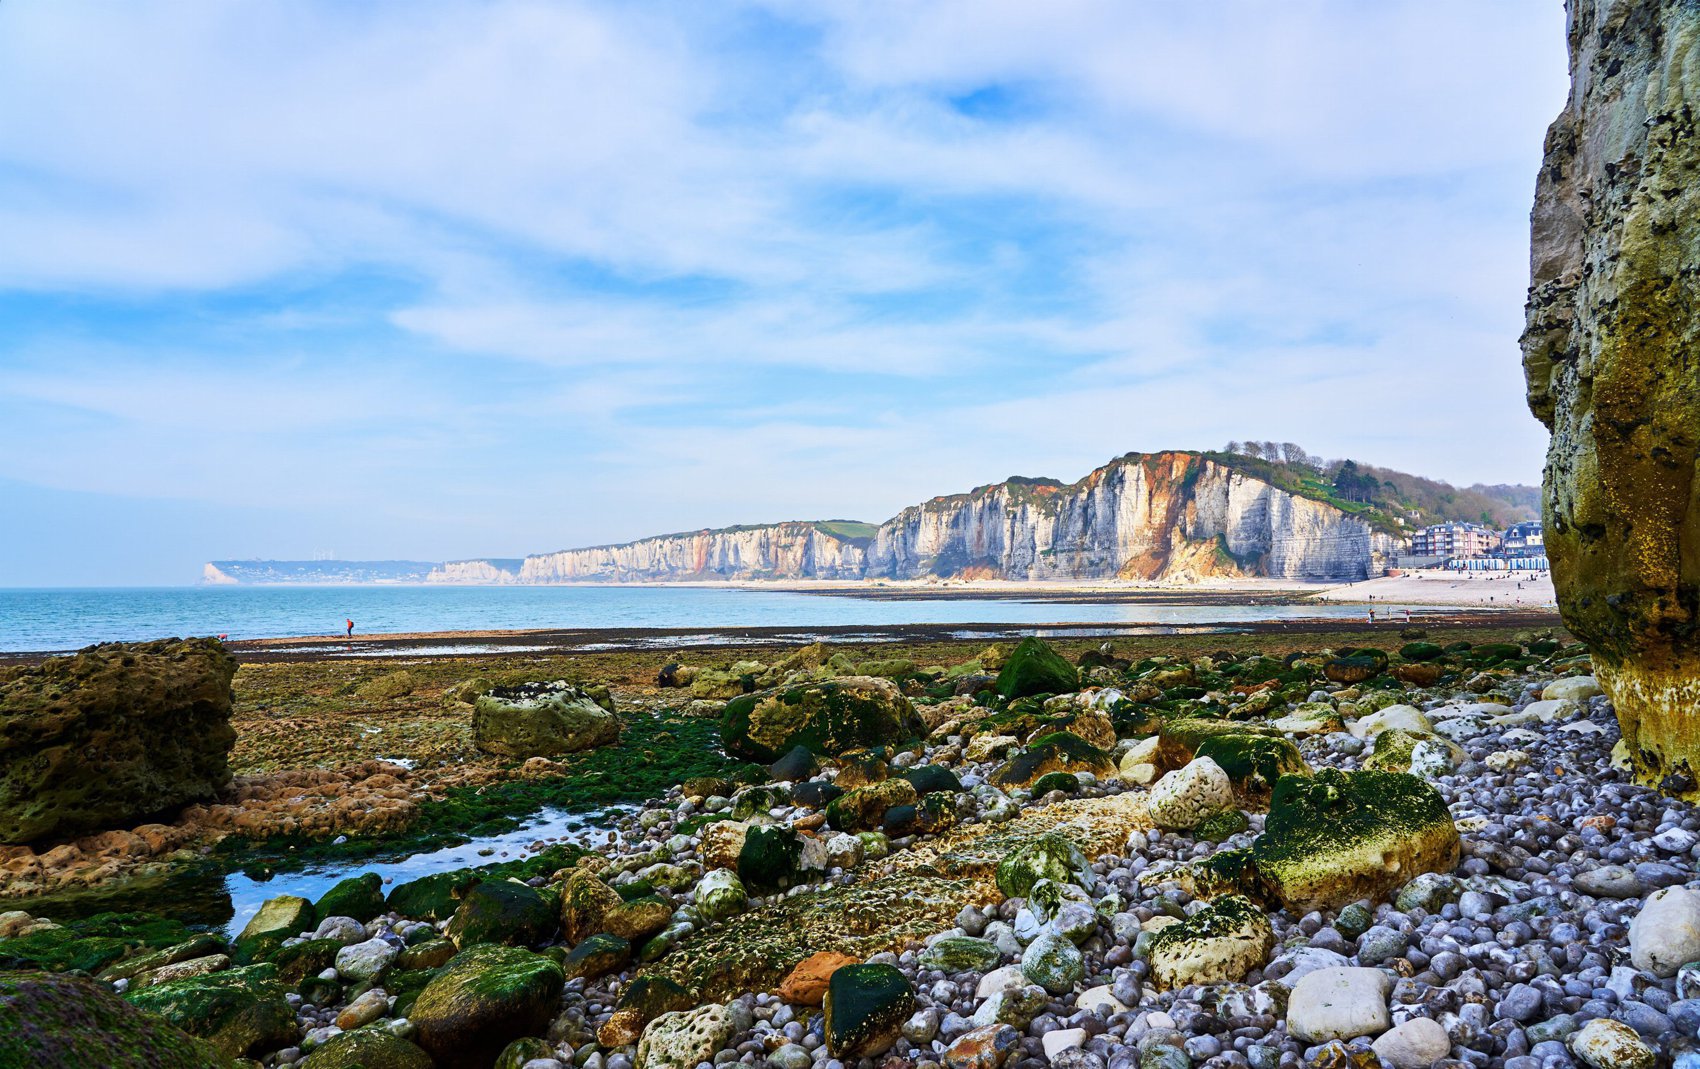 Hero Image for Yport (Pebble Beach, Cliff), Normandy Spring 201904